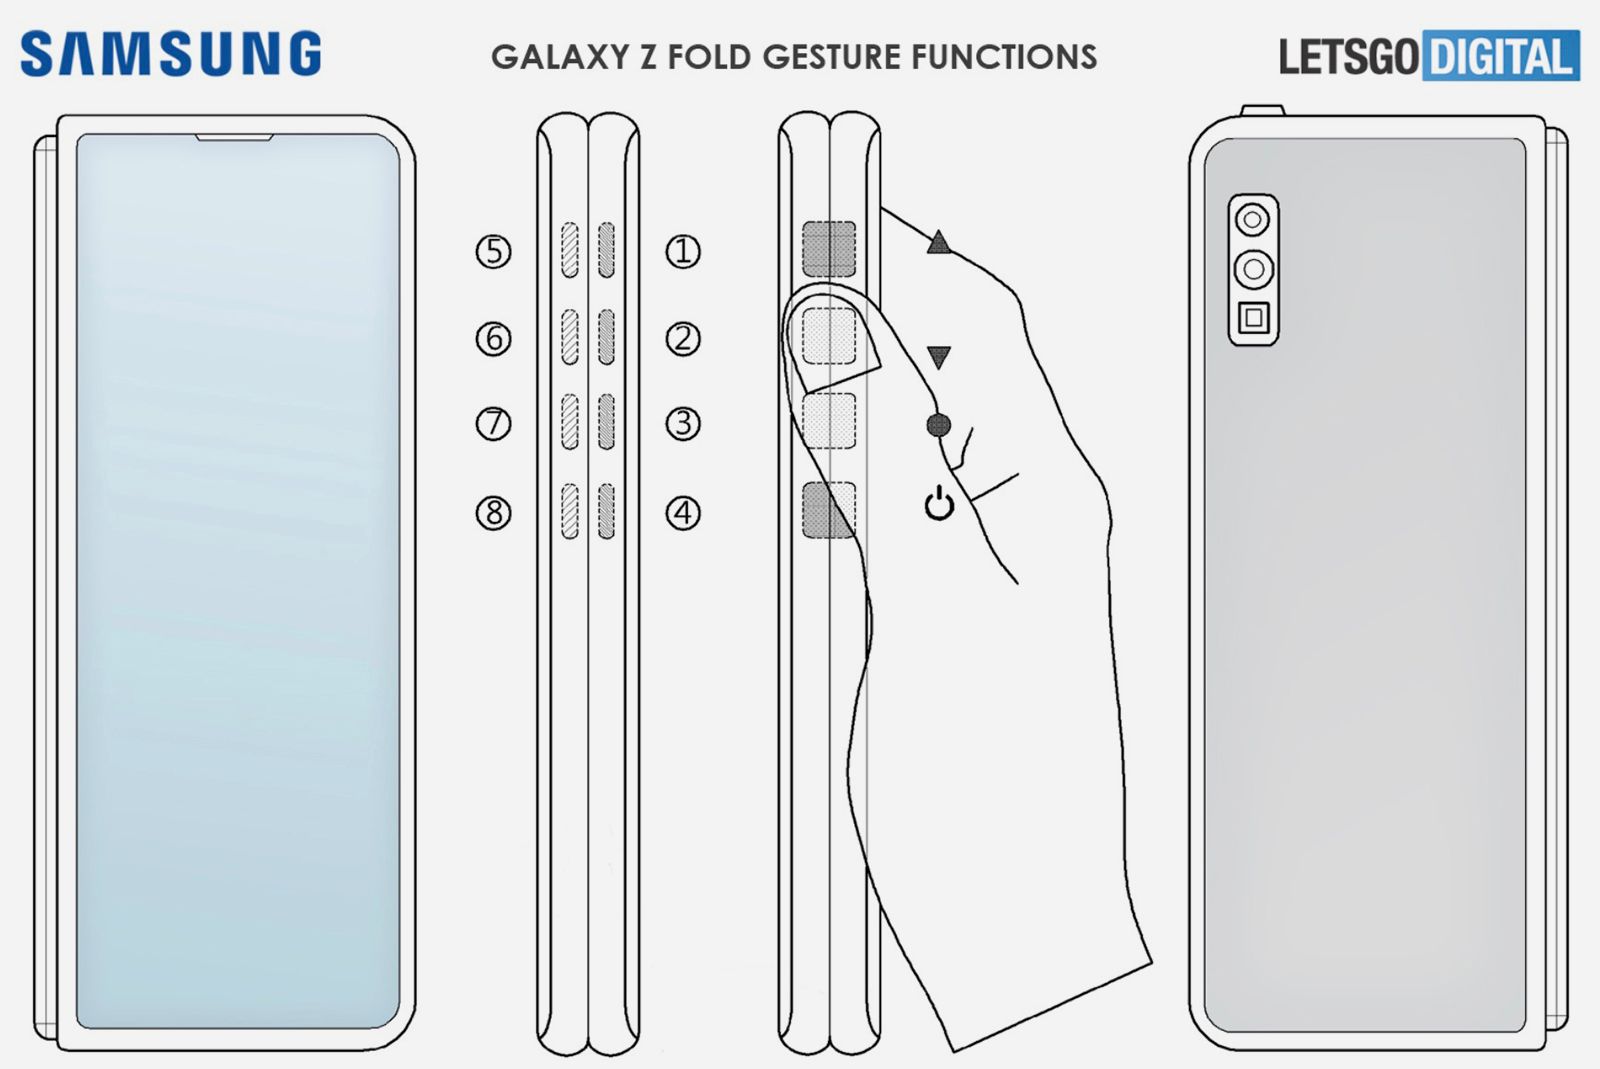 Samsung Galaxy Z Fold 3 with gesture control functions photo 2